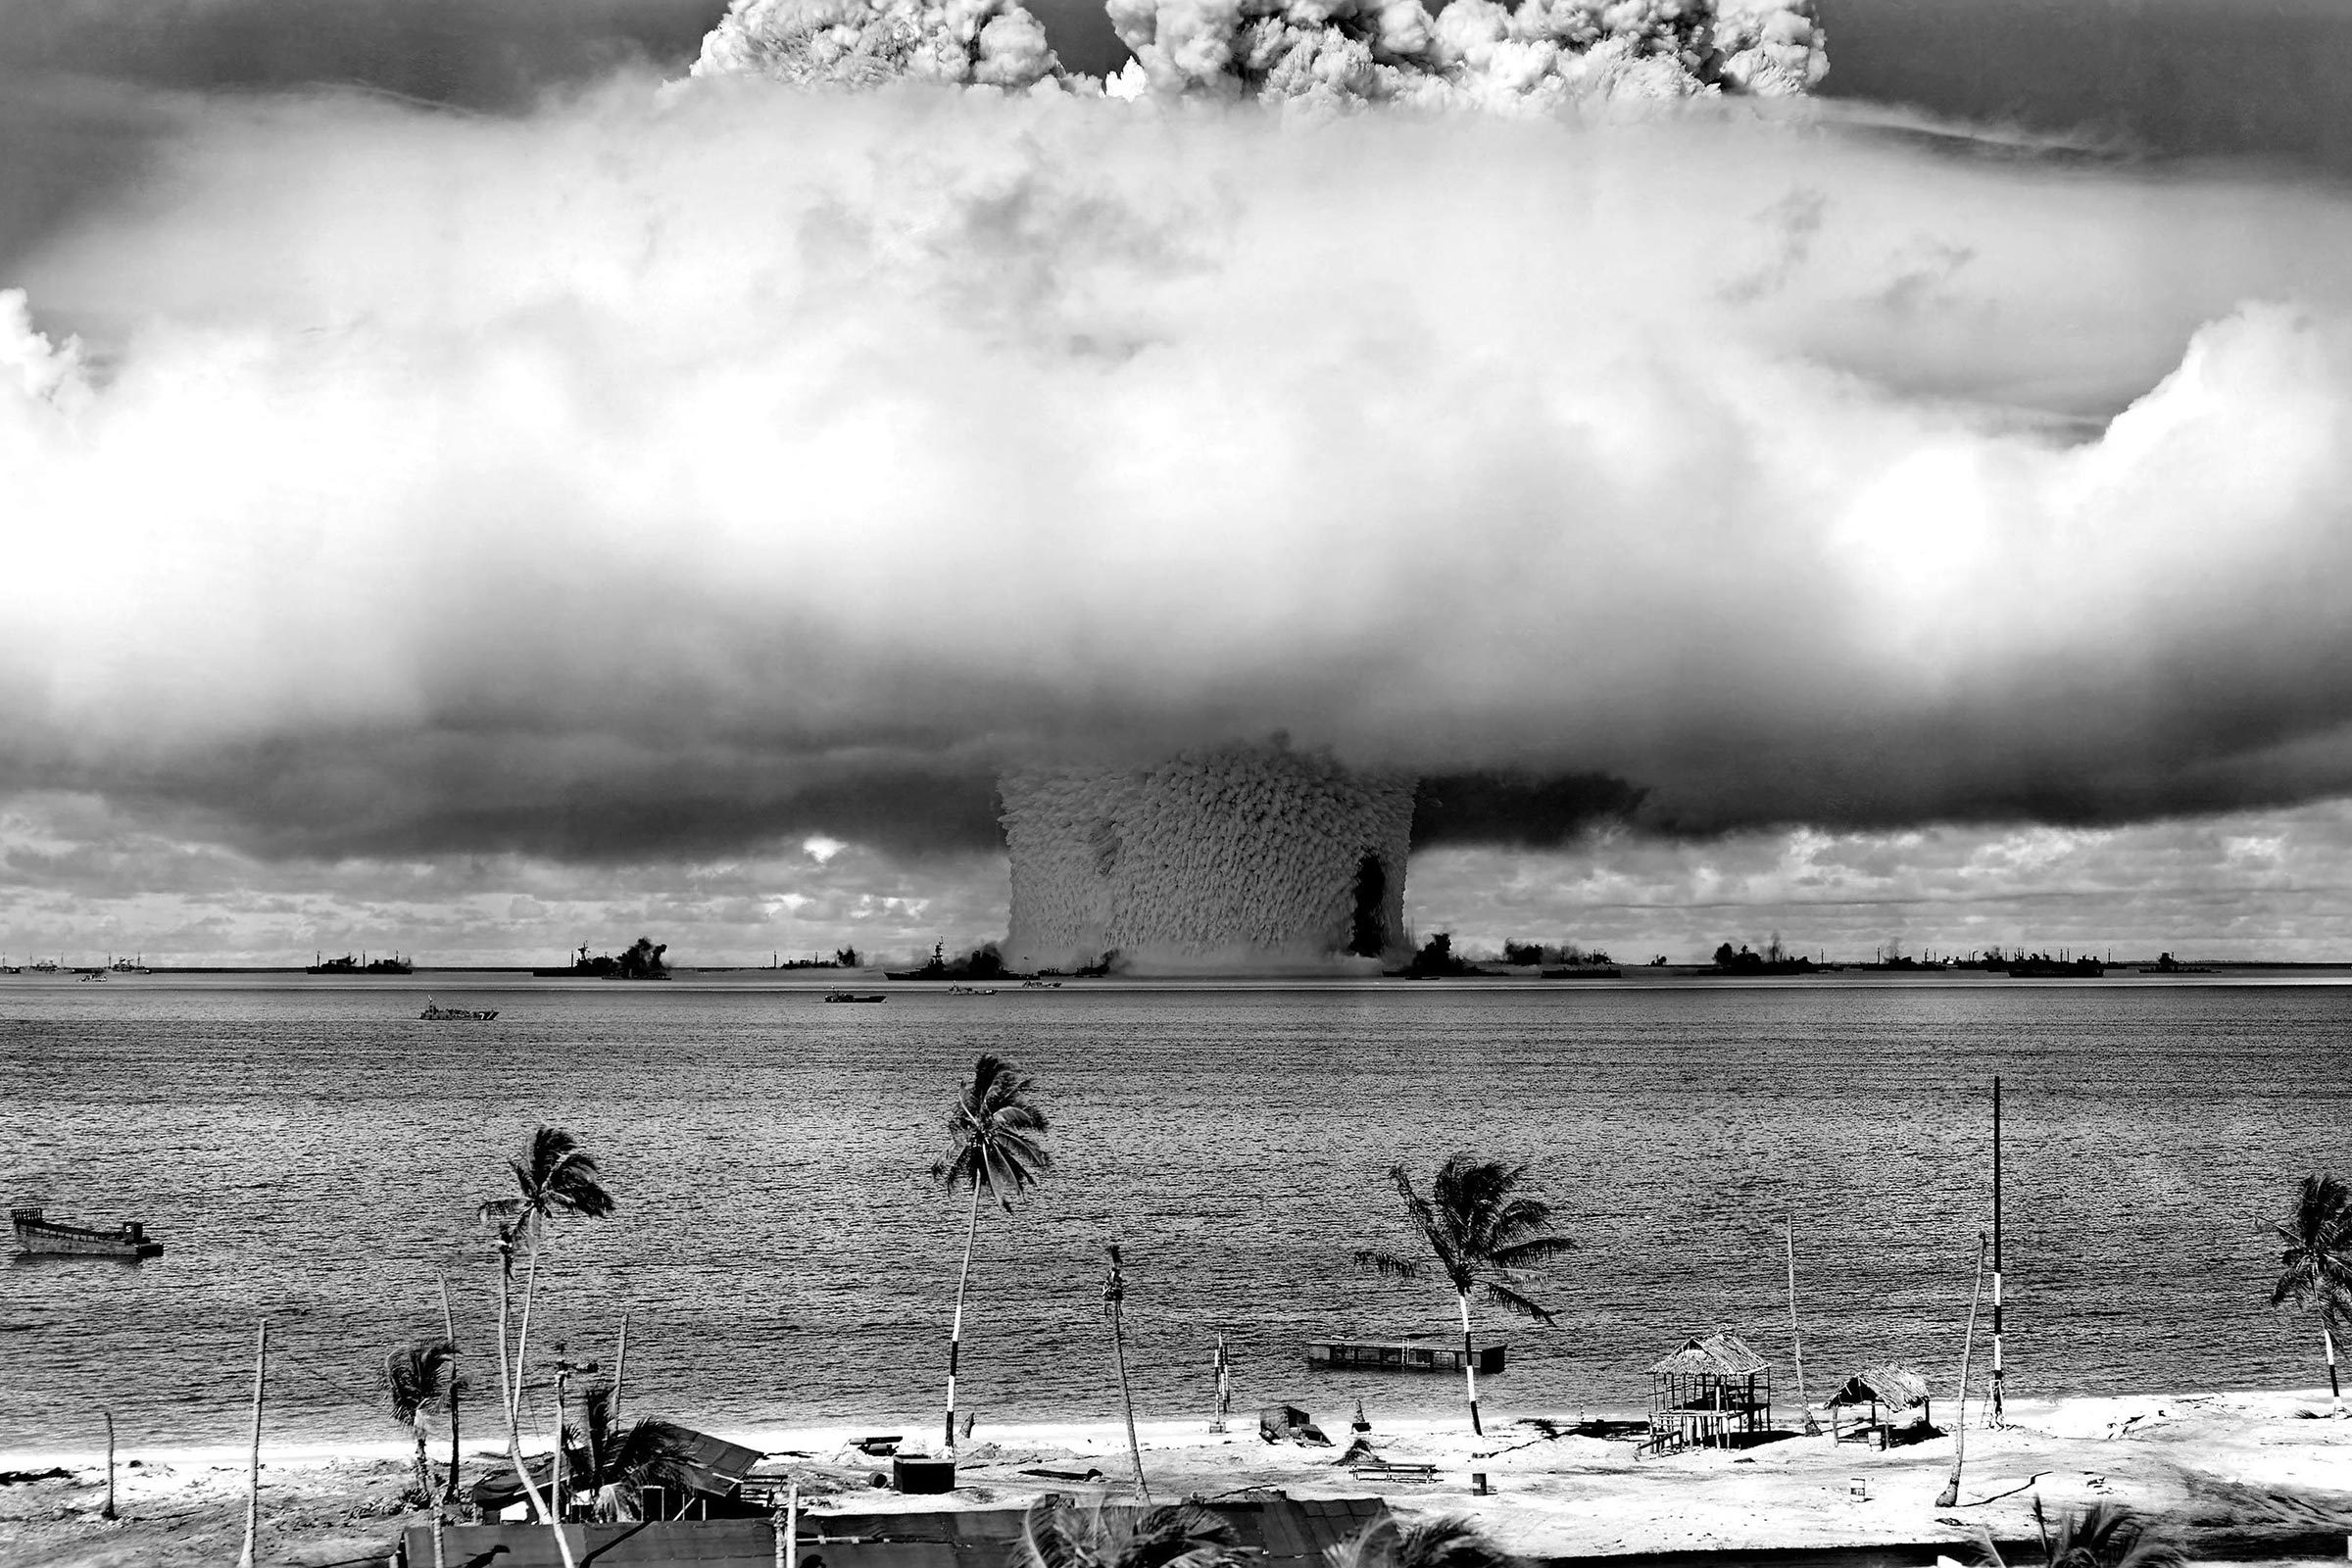 United States detonating an atomic bomb at Bikini Atoll in Micronesia in the first underwater test of the device, 1946.